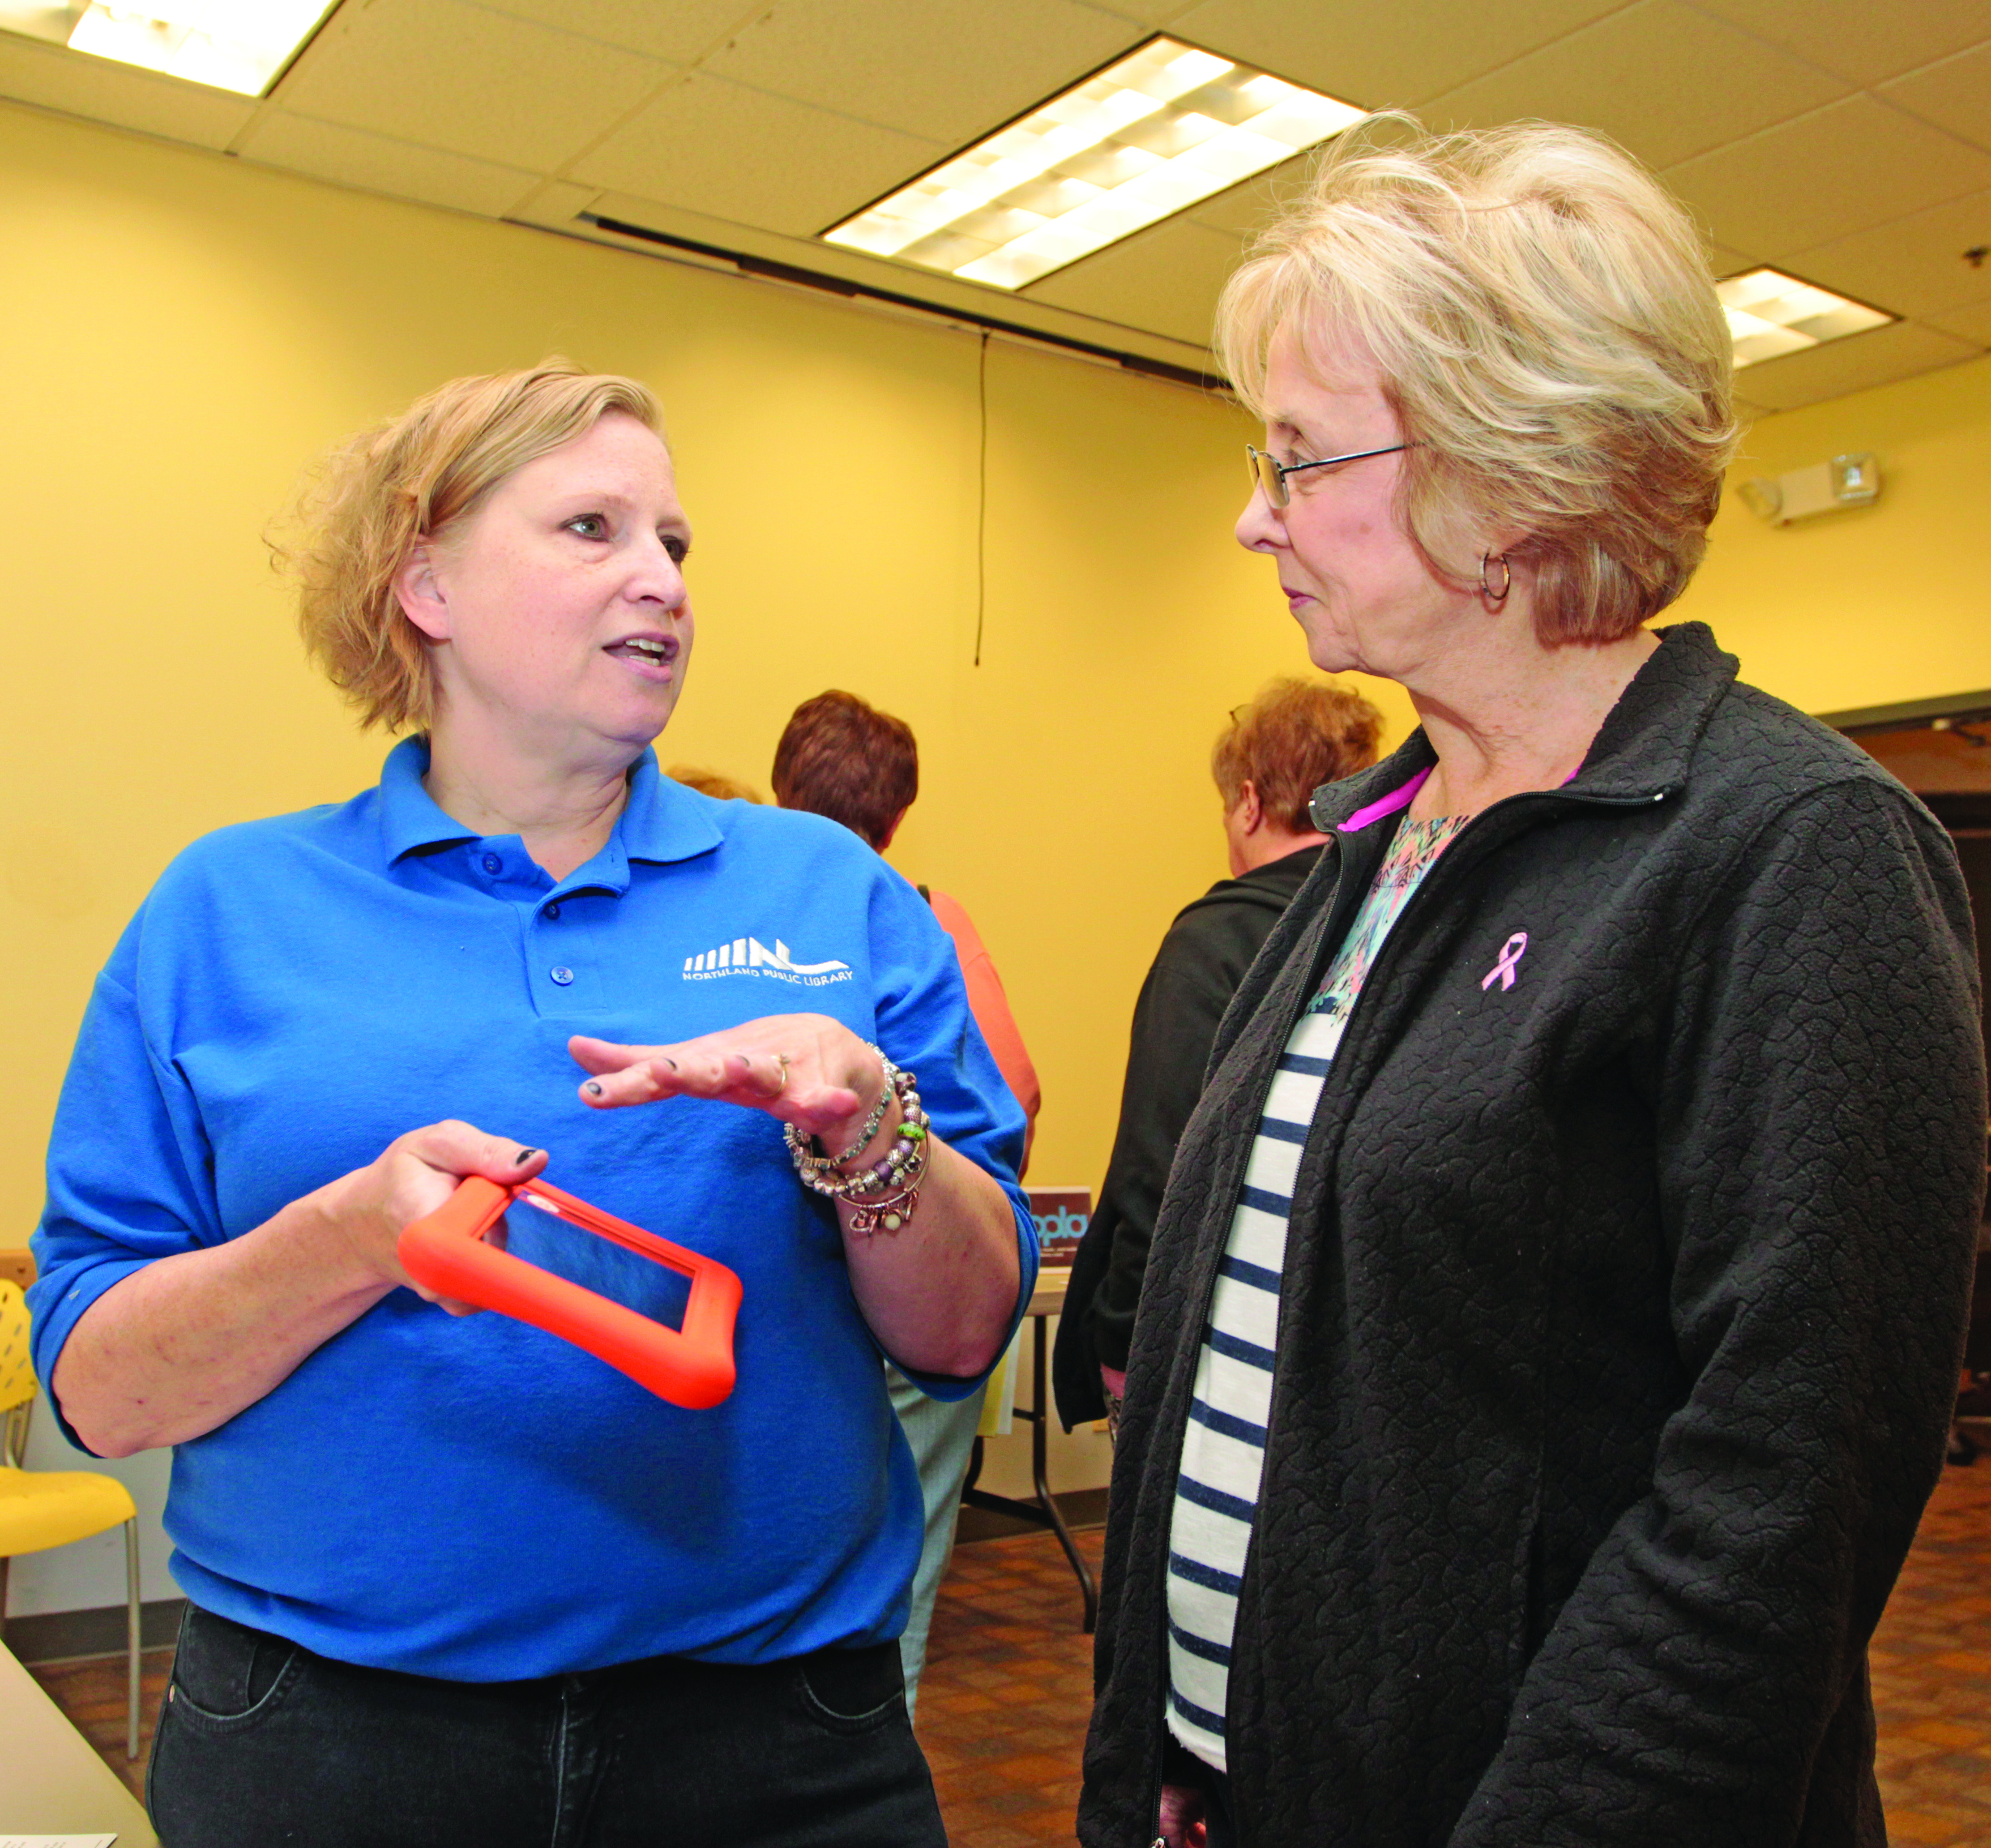 Children’s librarian Jeanne Bondi explains the benefits of the “Playaway” device to Connie Johnston. Photo by Chuck LeClaire